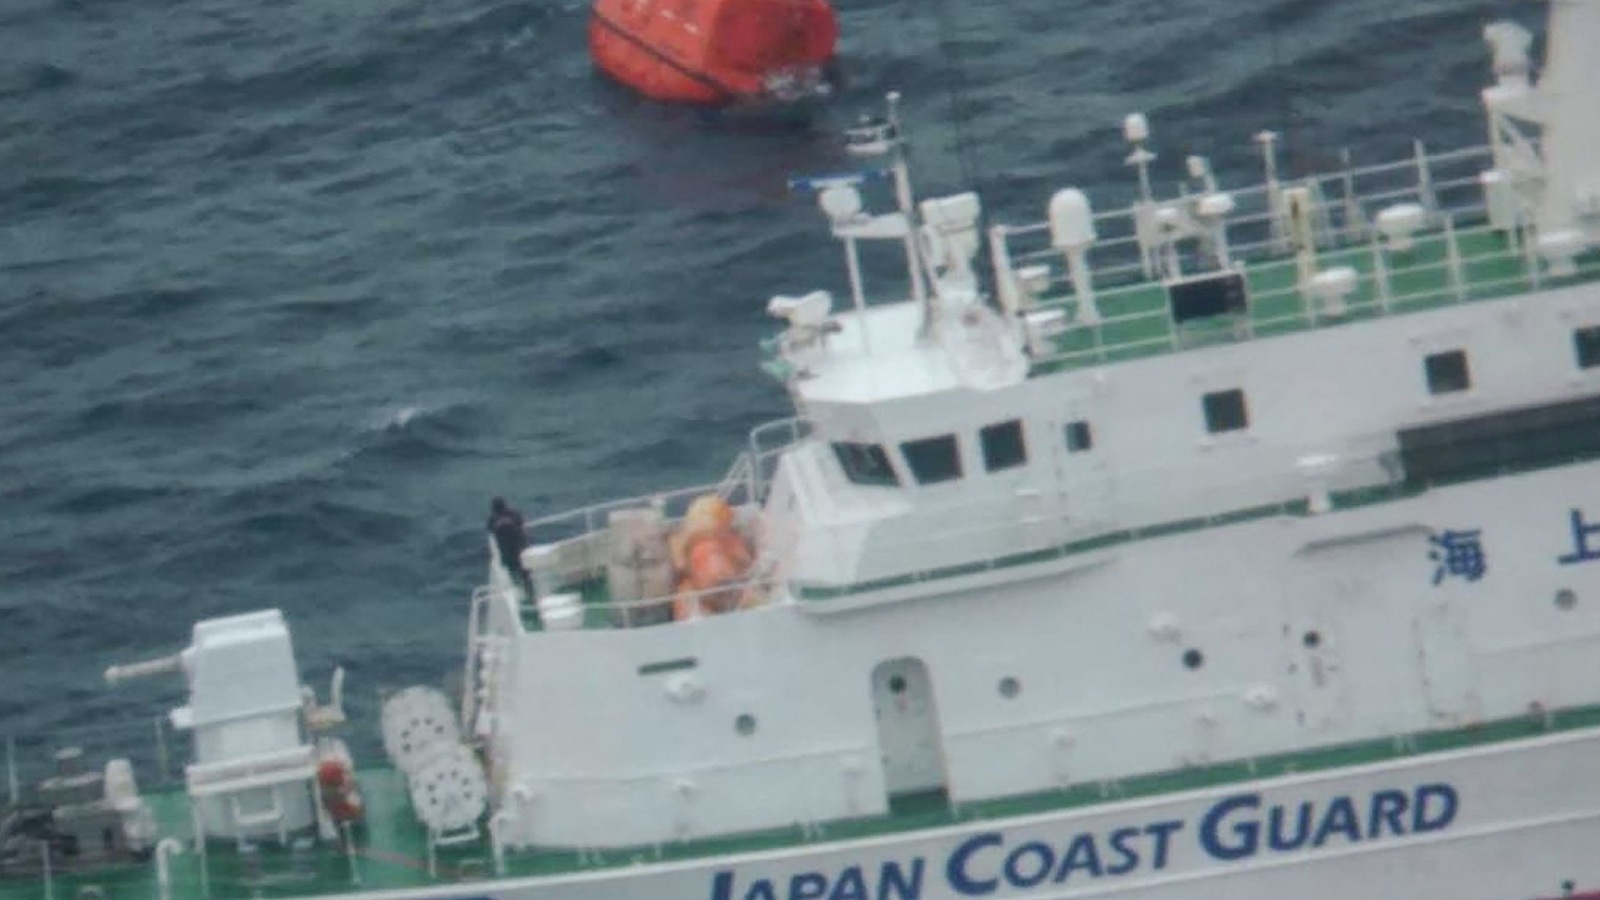 6 Chinese nationals among 8 dead after ship sinks near Japan